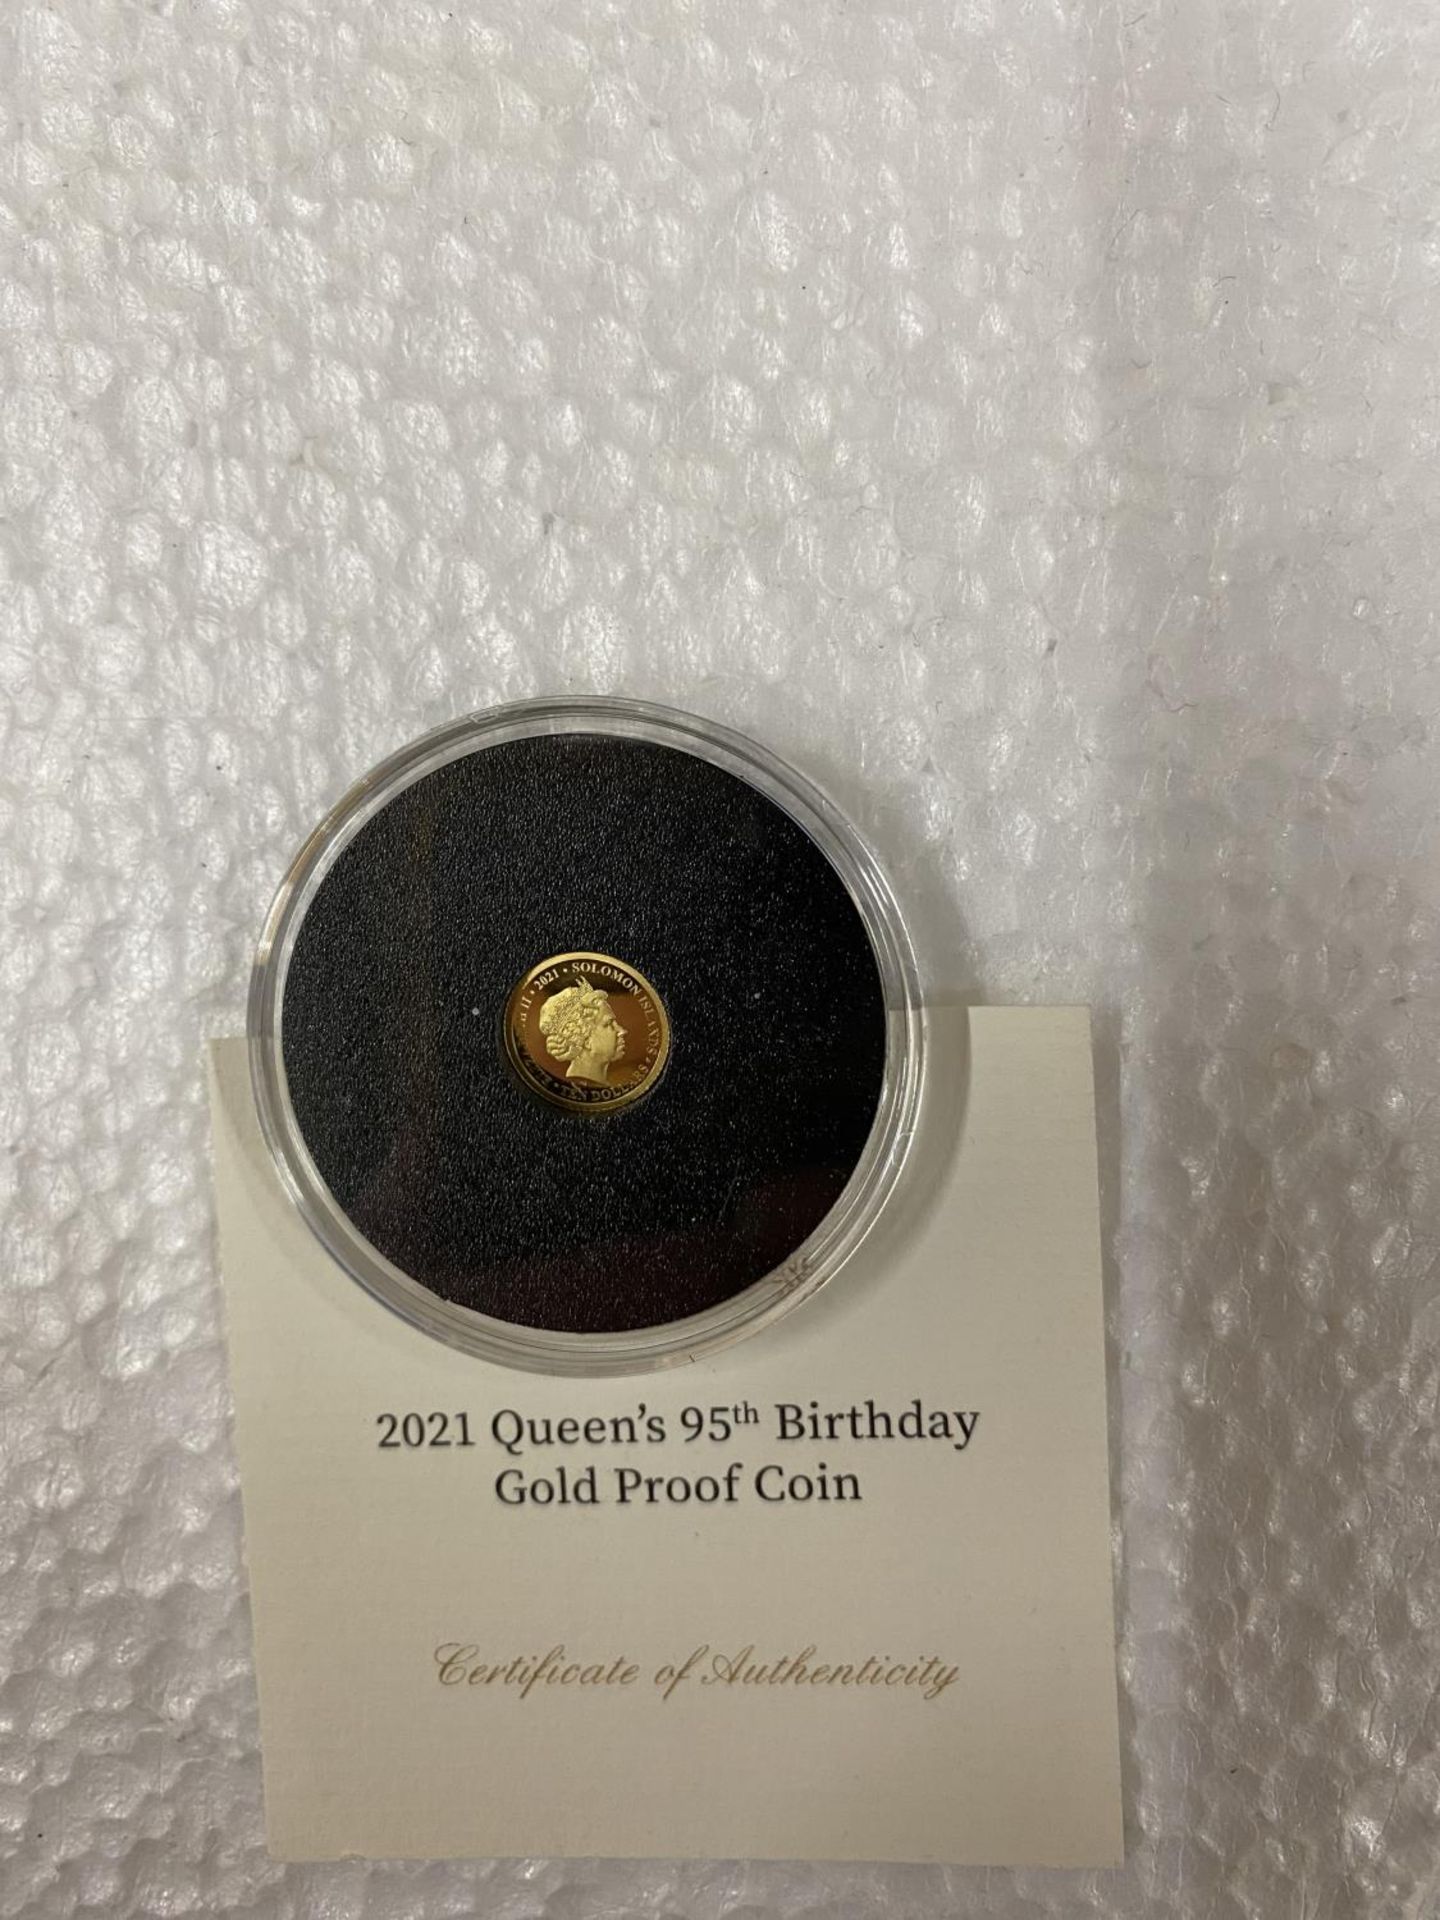 SOLOMON ISLANDS “2021 QUEEN’S 95TH BIRTHDAY” A 24 CARAT GOLD PROOF COIN WITH COA. THE COIN WEIGHS - Image 3 of 3